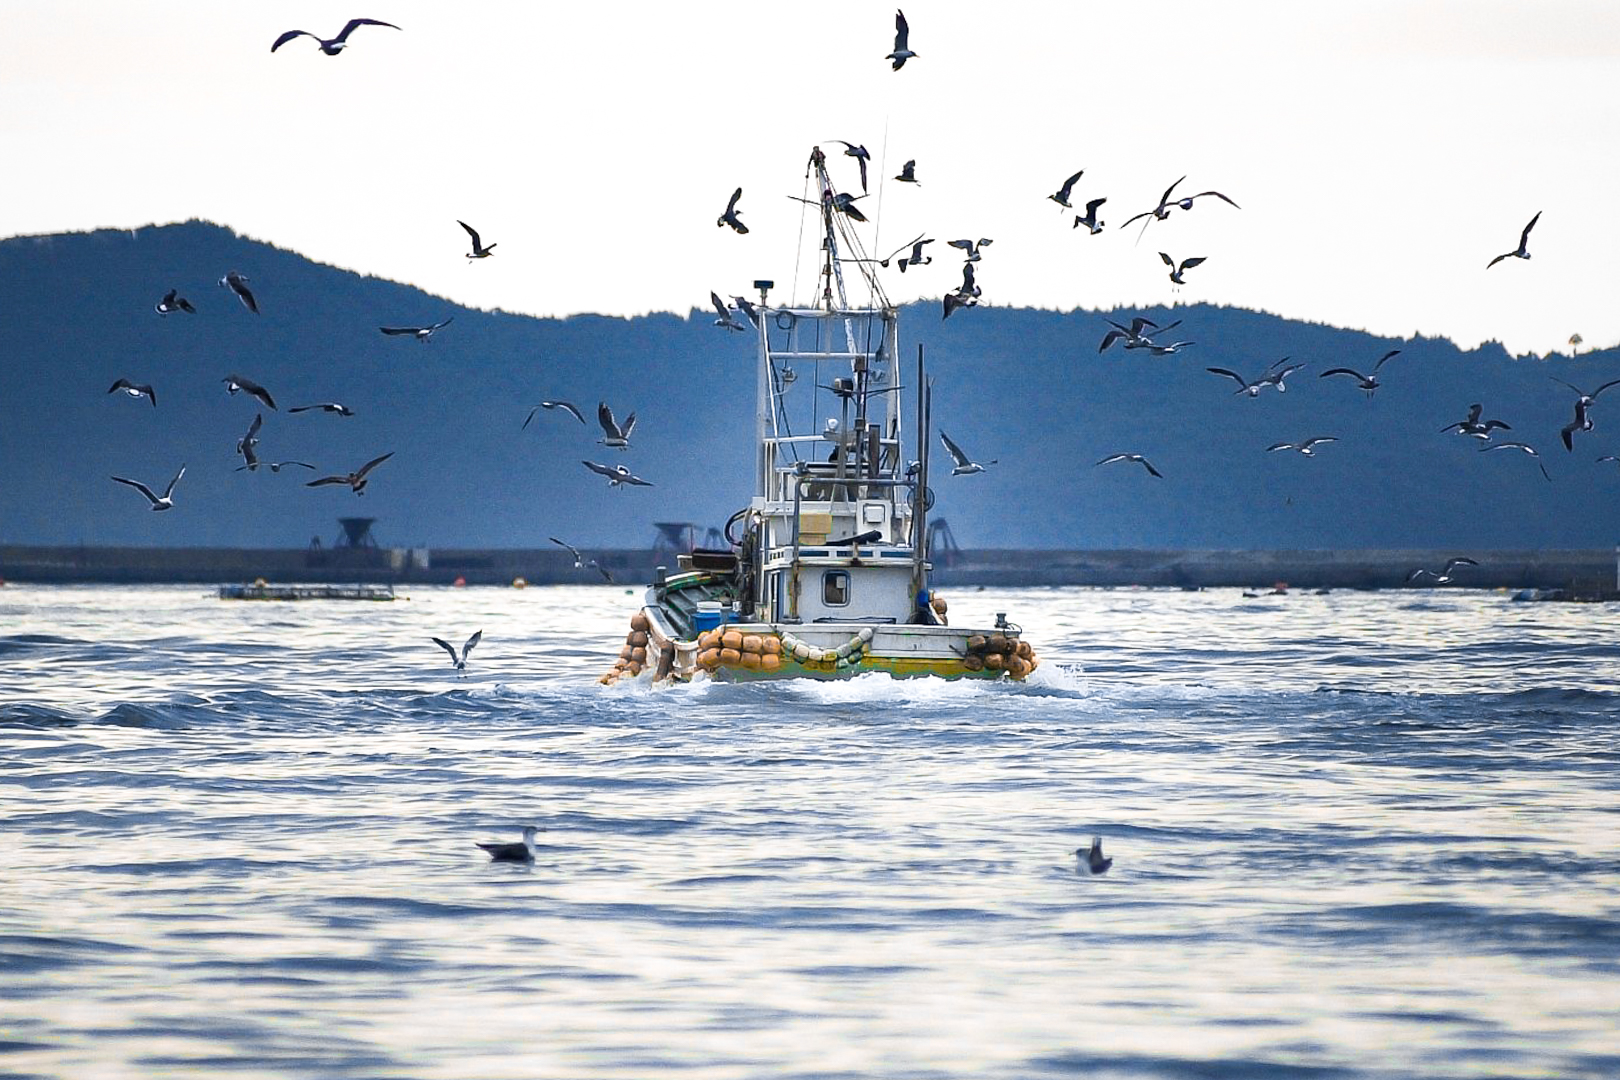 A fishing boat going out for the early morning catch at first light in Onagawa. Strings of buoys can be seen on the moving boat, which is surrounded by birds flying around it. Mountains can be seen in the distance.